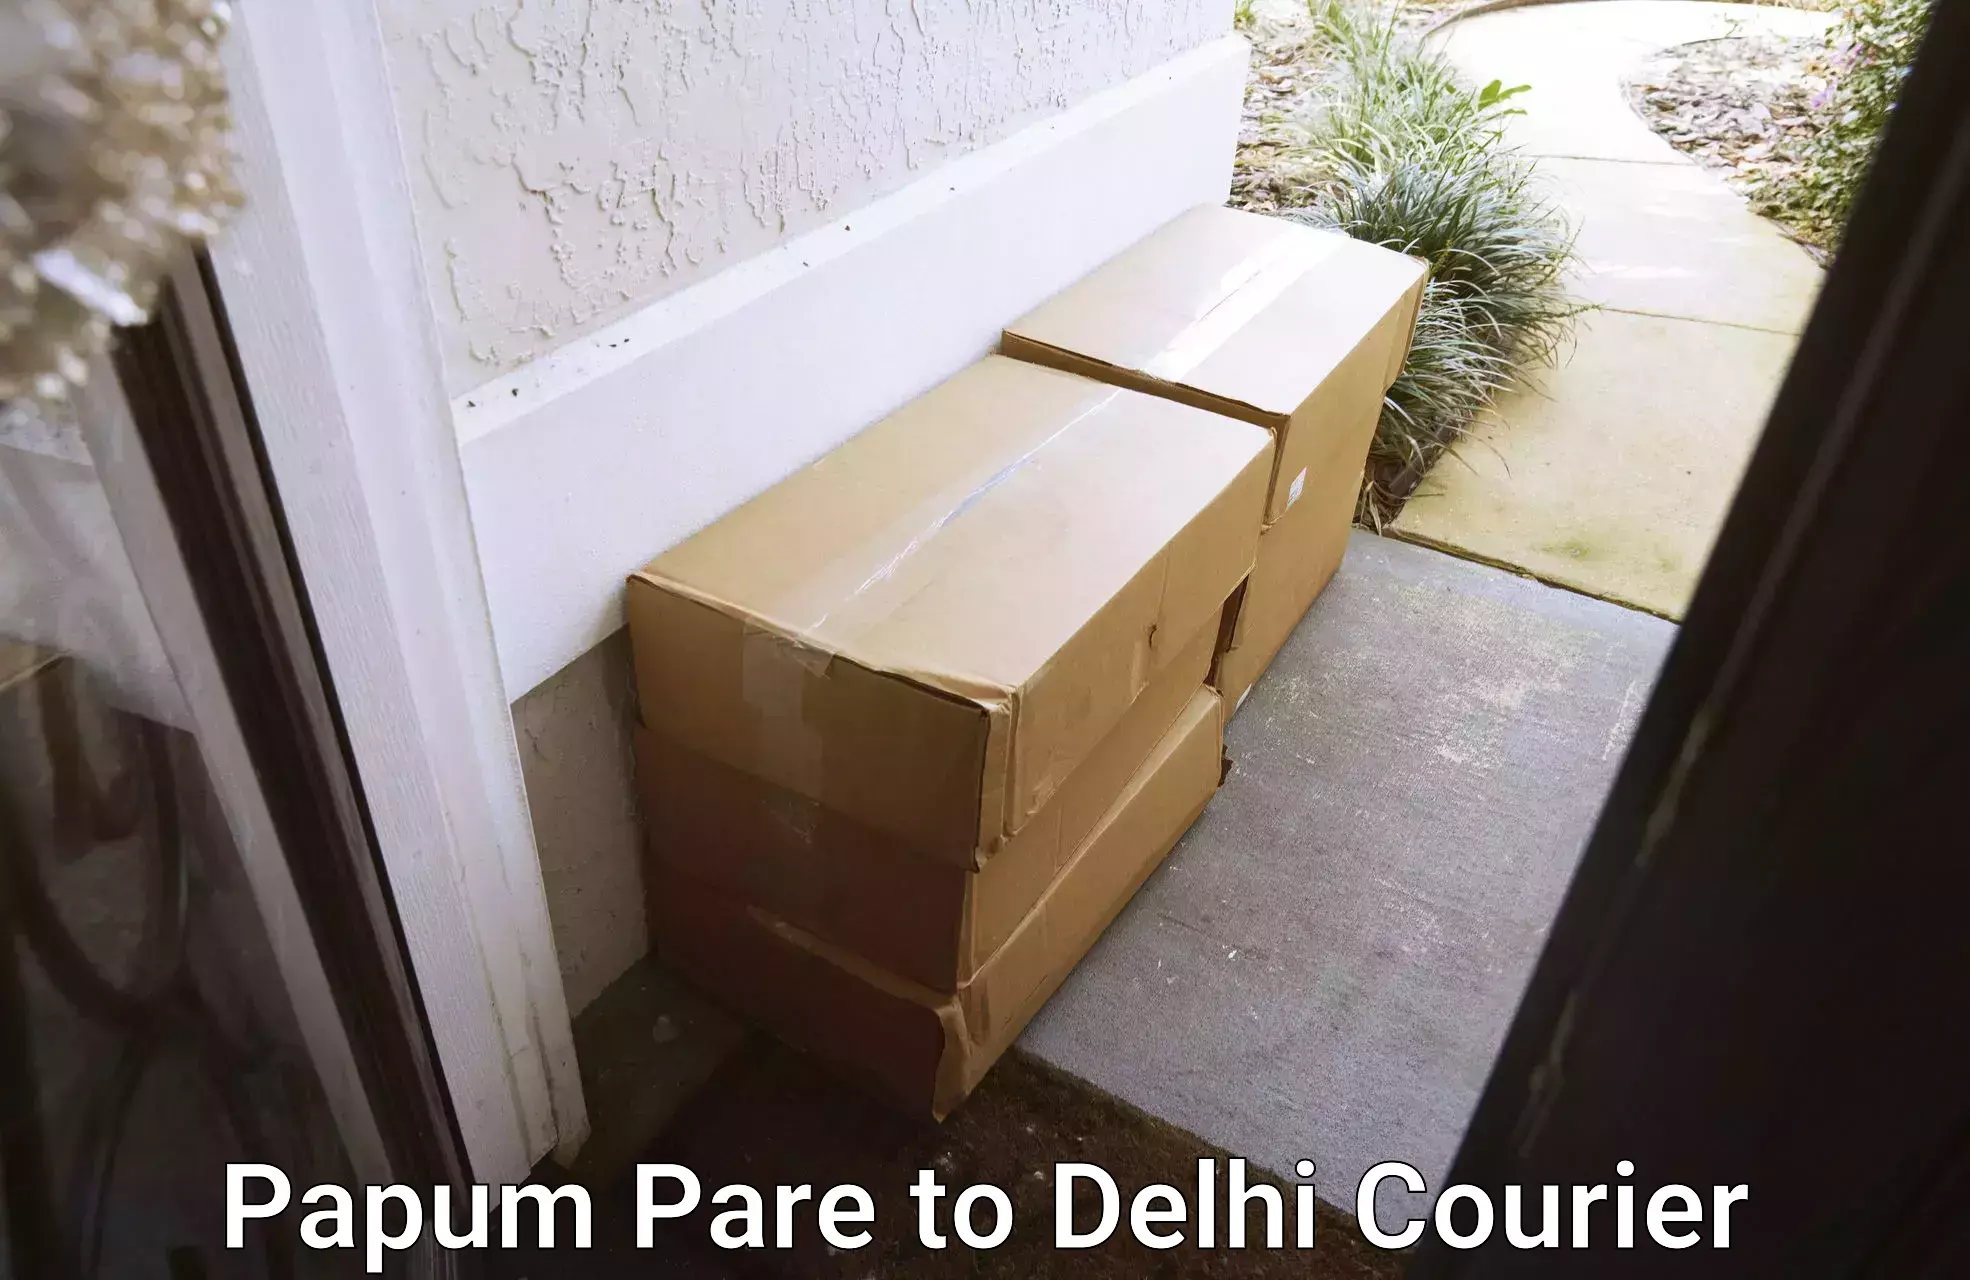 Express delivery capabilities Papum Pare to Delhi